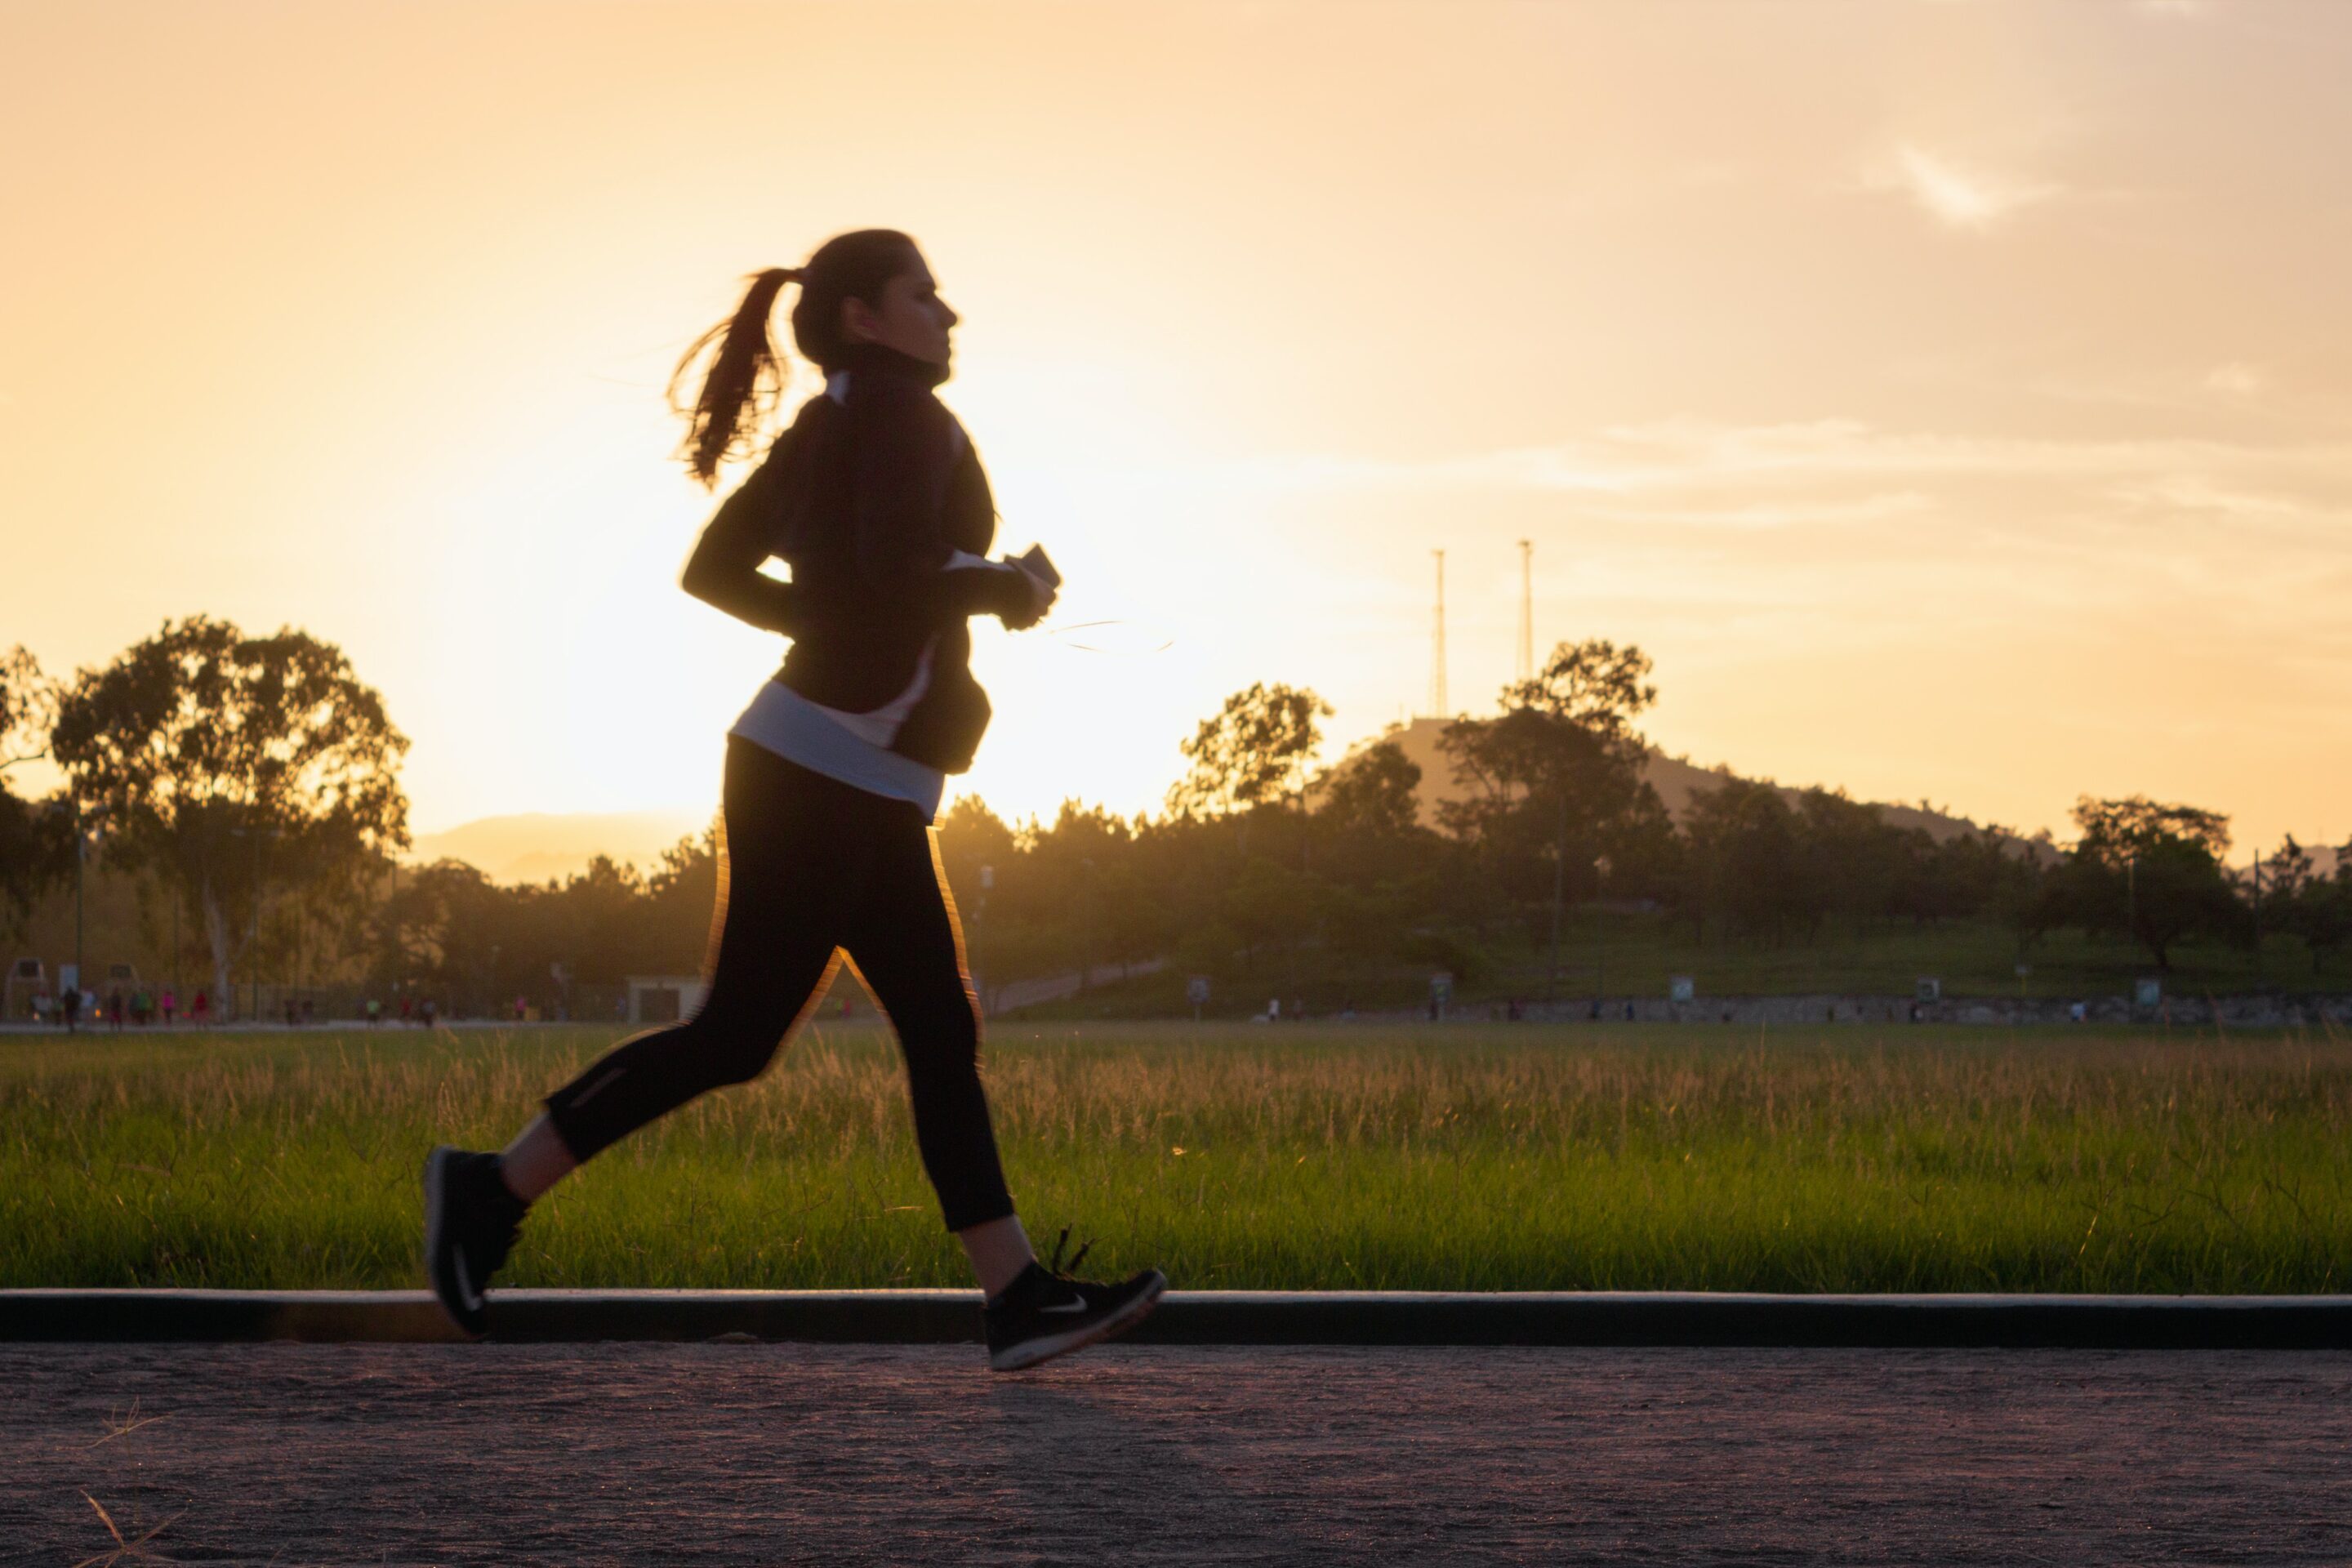 A woman is running on an athletics track while the sun is setting.